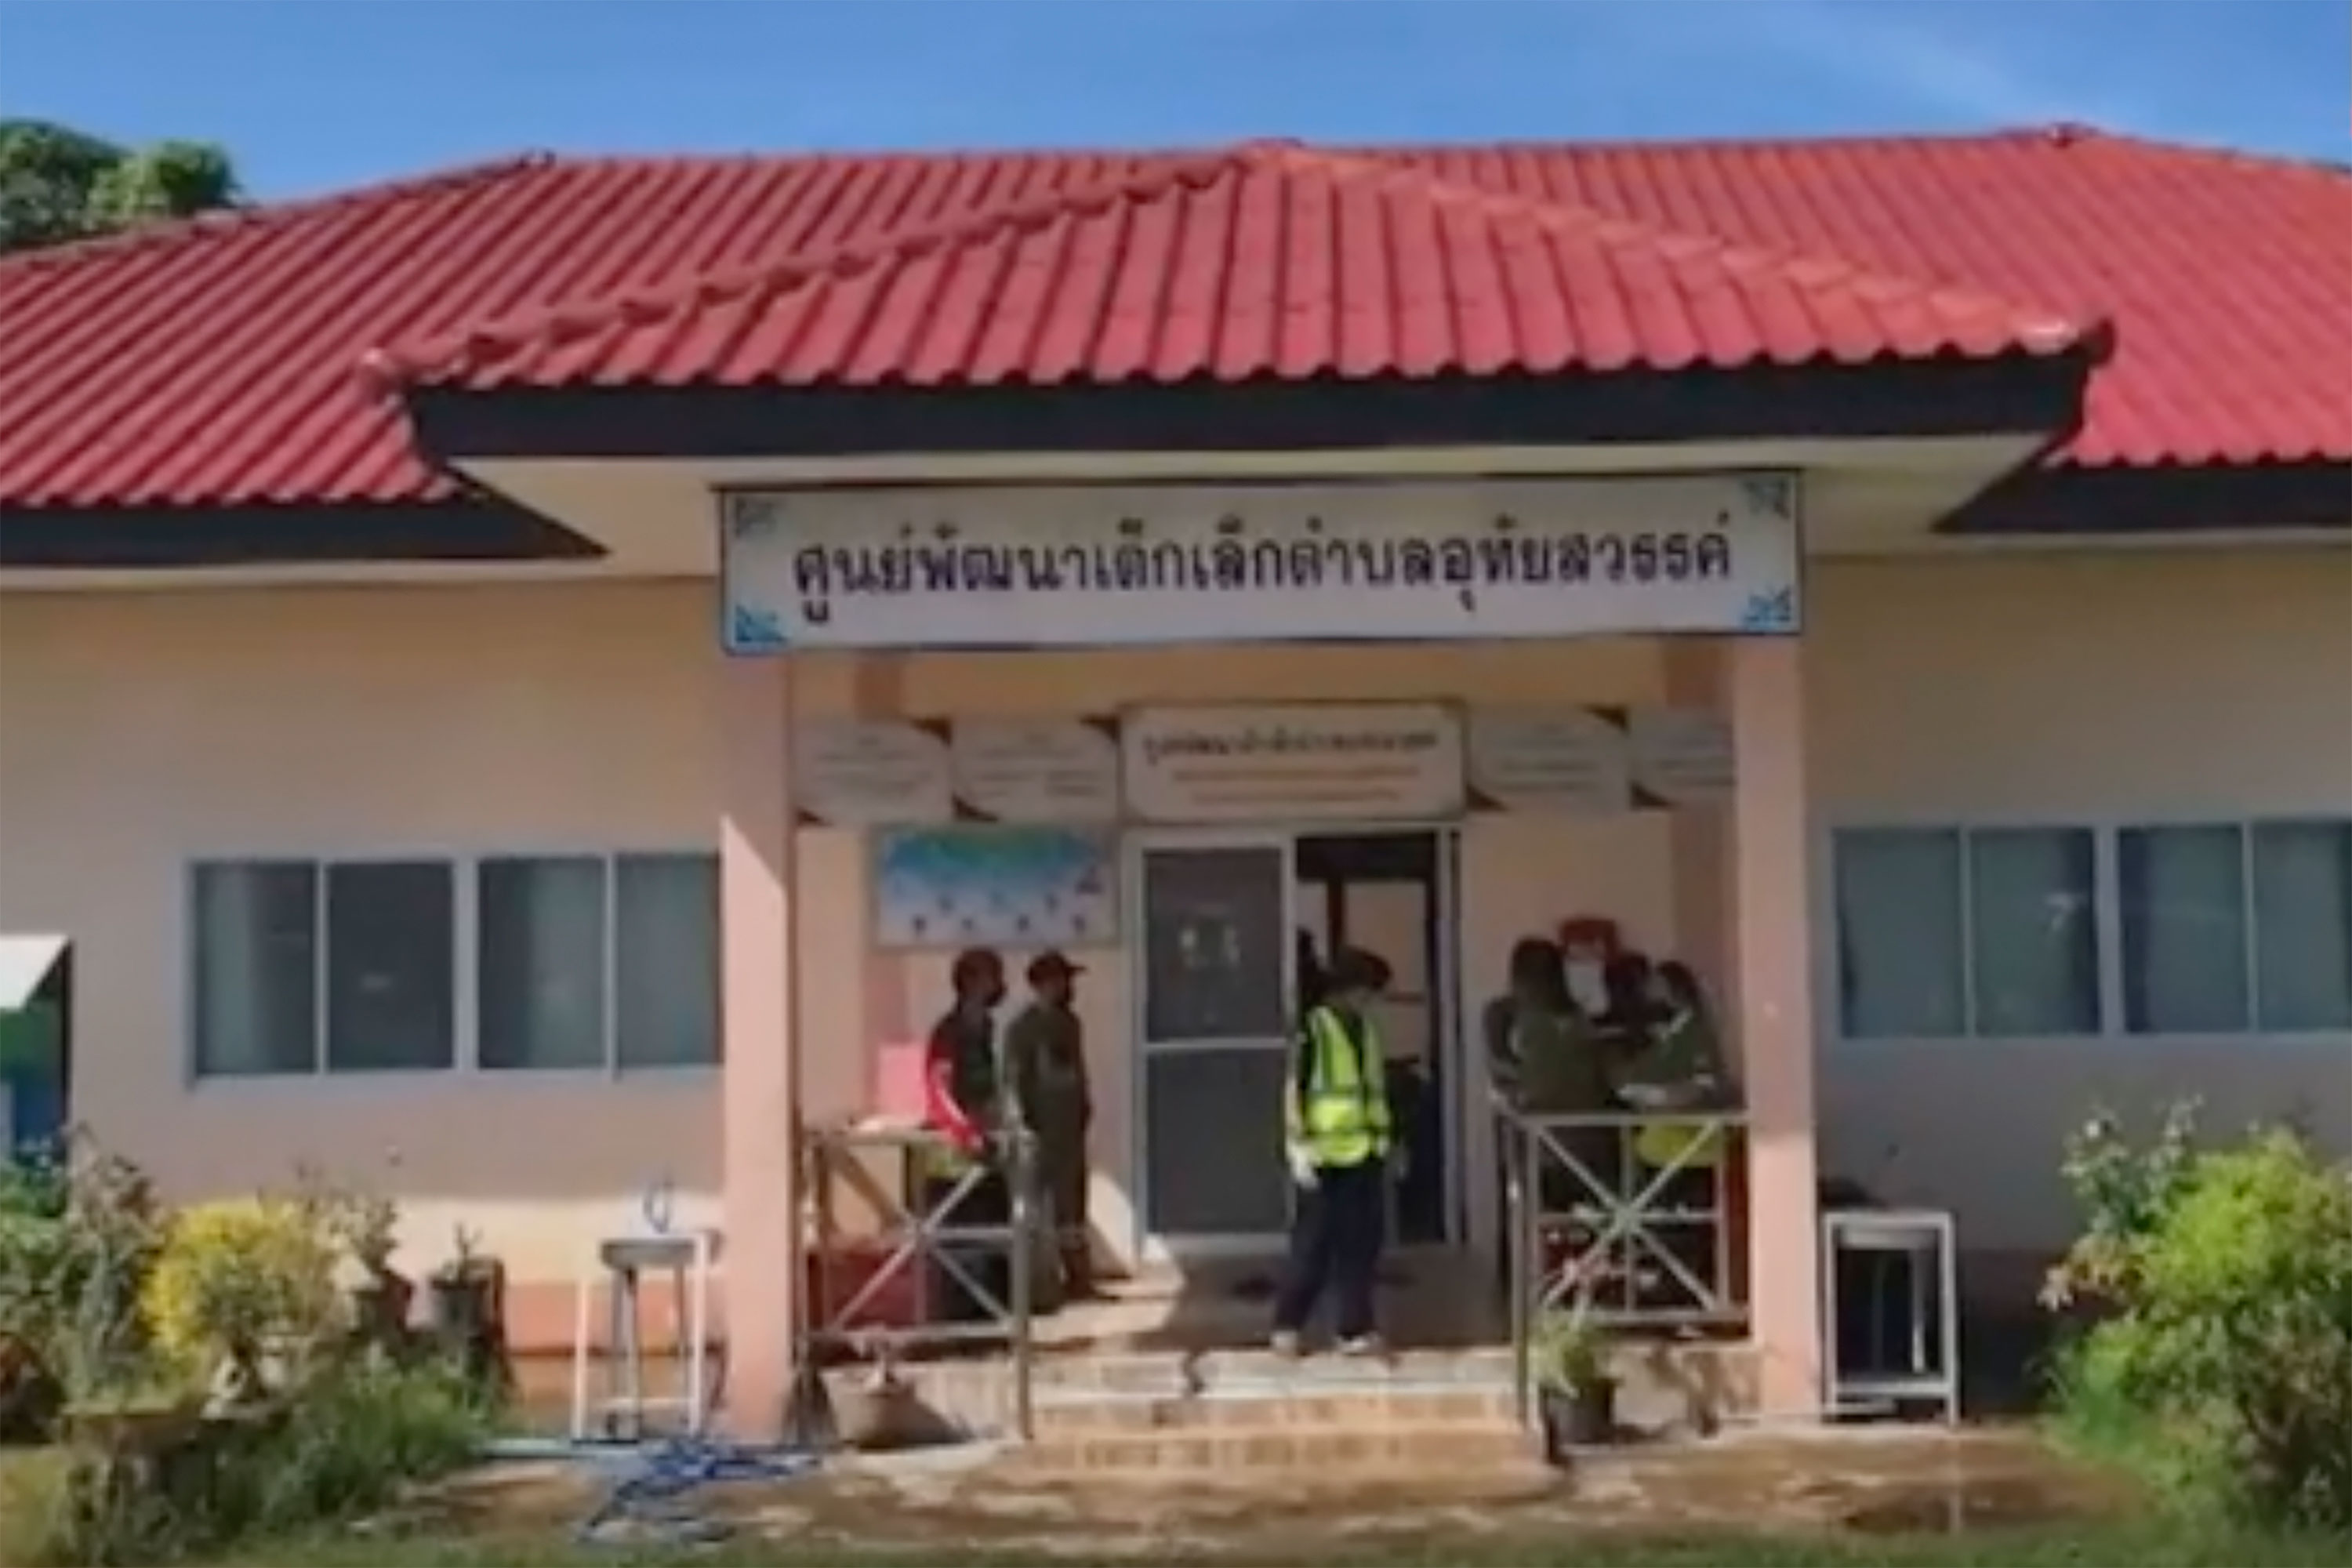 In this image taken from video, officials enter the site of the shooting in Nongbua Lamphu, Thailand, on Thursday.